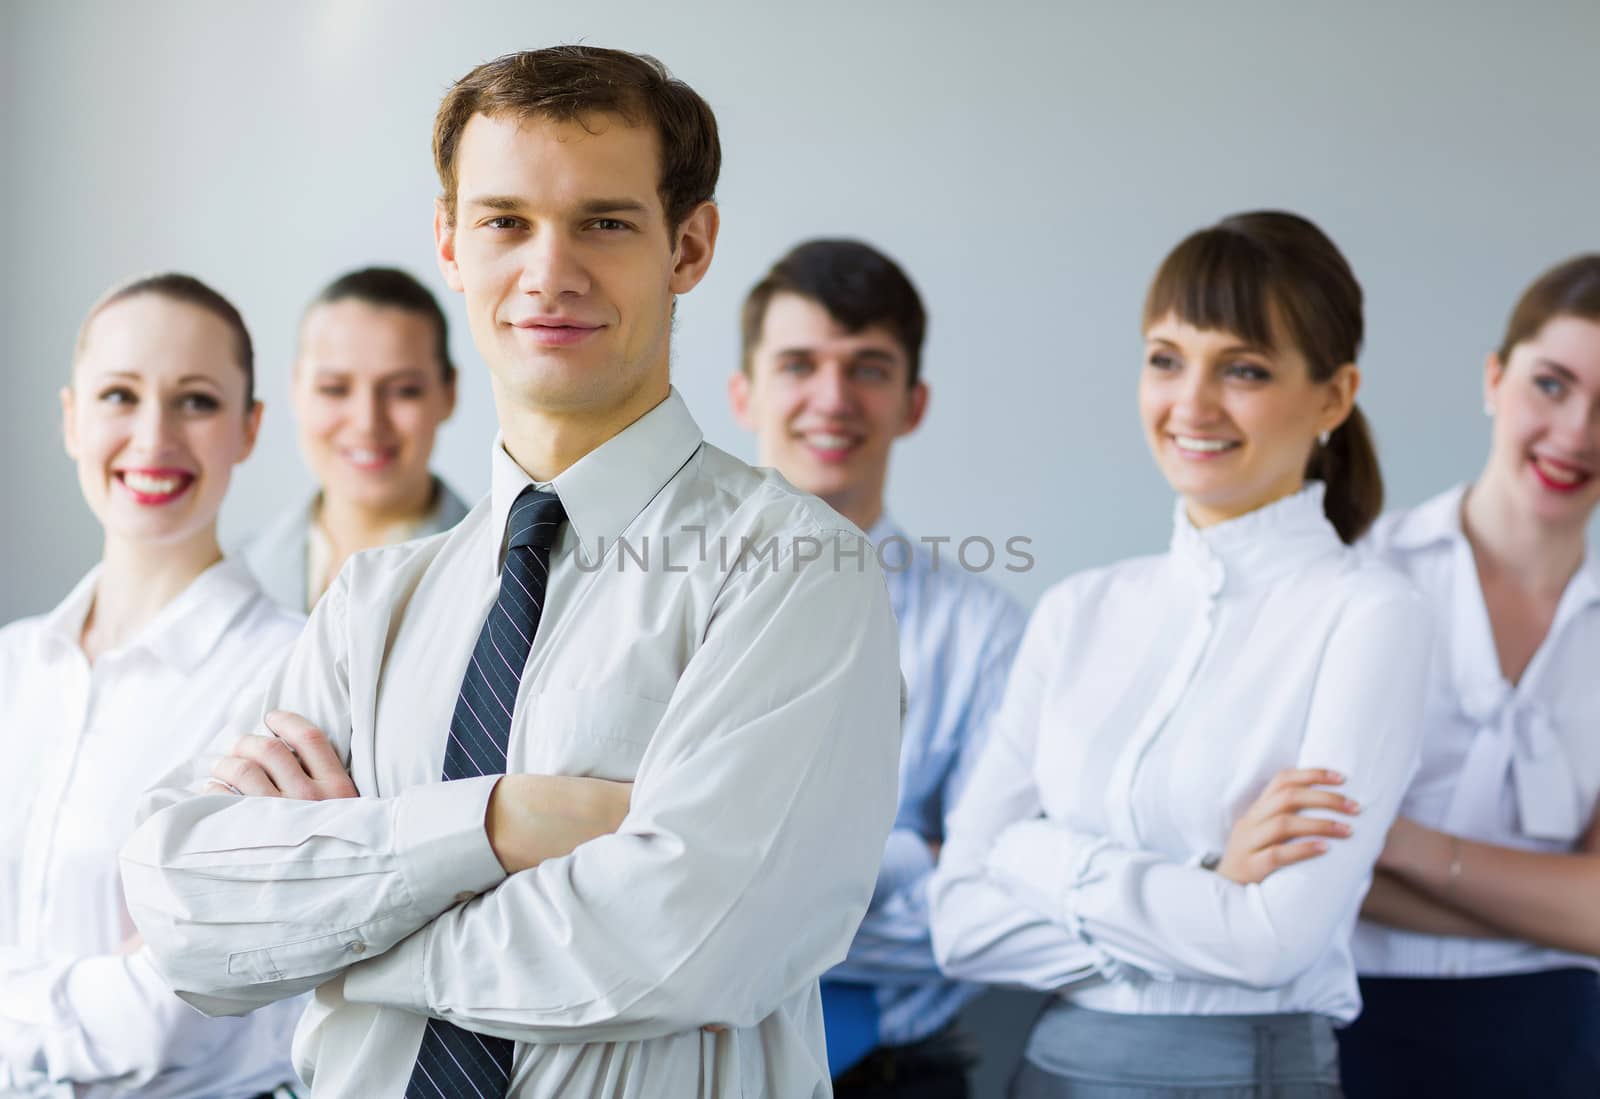 Young business people standing with arms crossed on chest